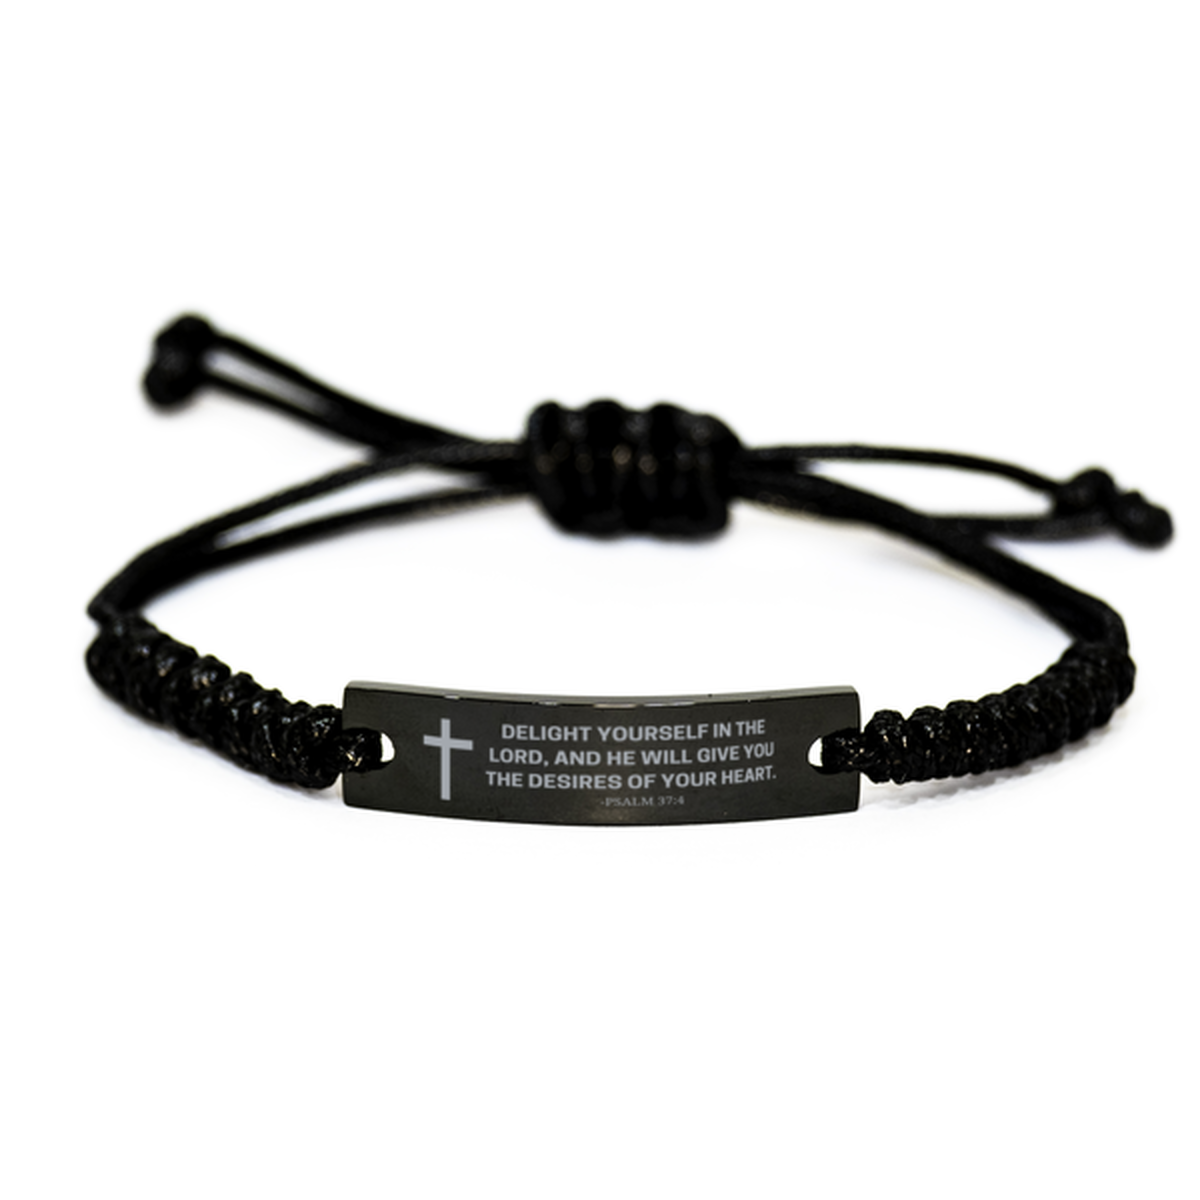 Baptism Gifts For Teenage Boys Girls, Christian Bible Verse Black Rope Bracelet, Delight yourself in the Lord, Catholic Confirmation Gifts for Son, Godson, Grandson, Nephew